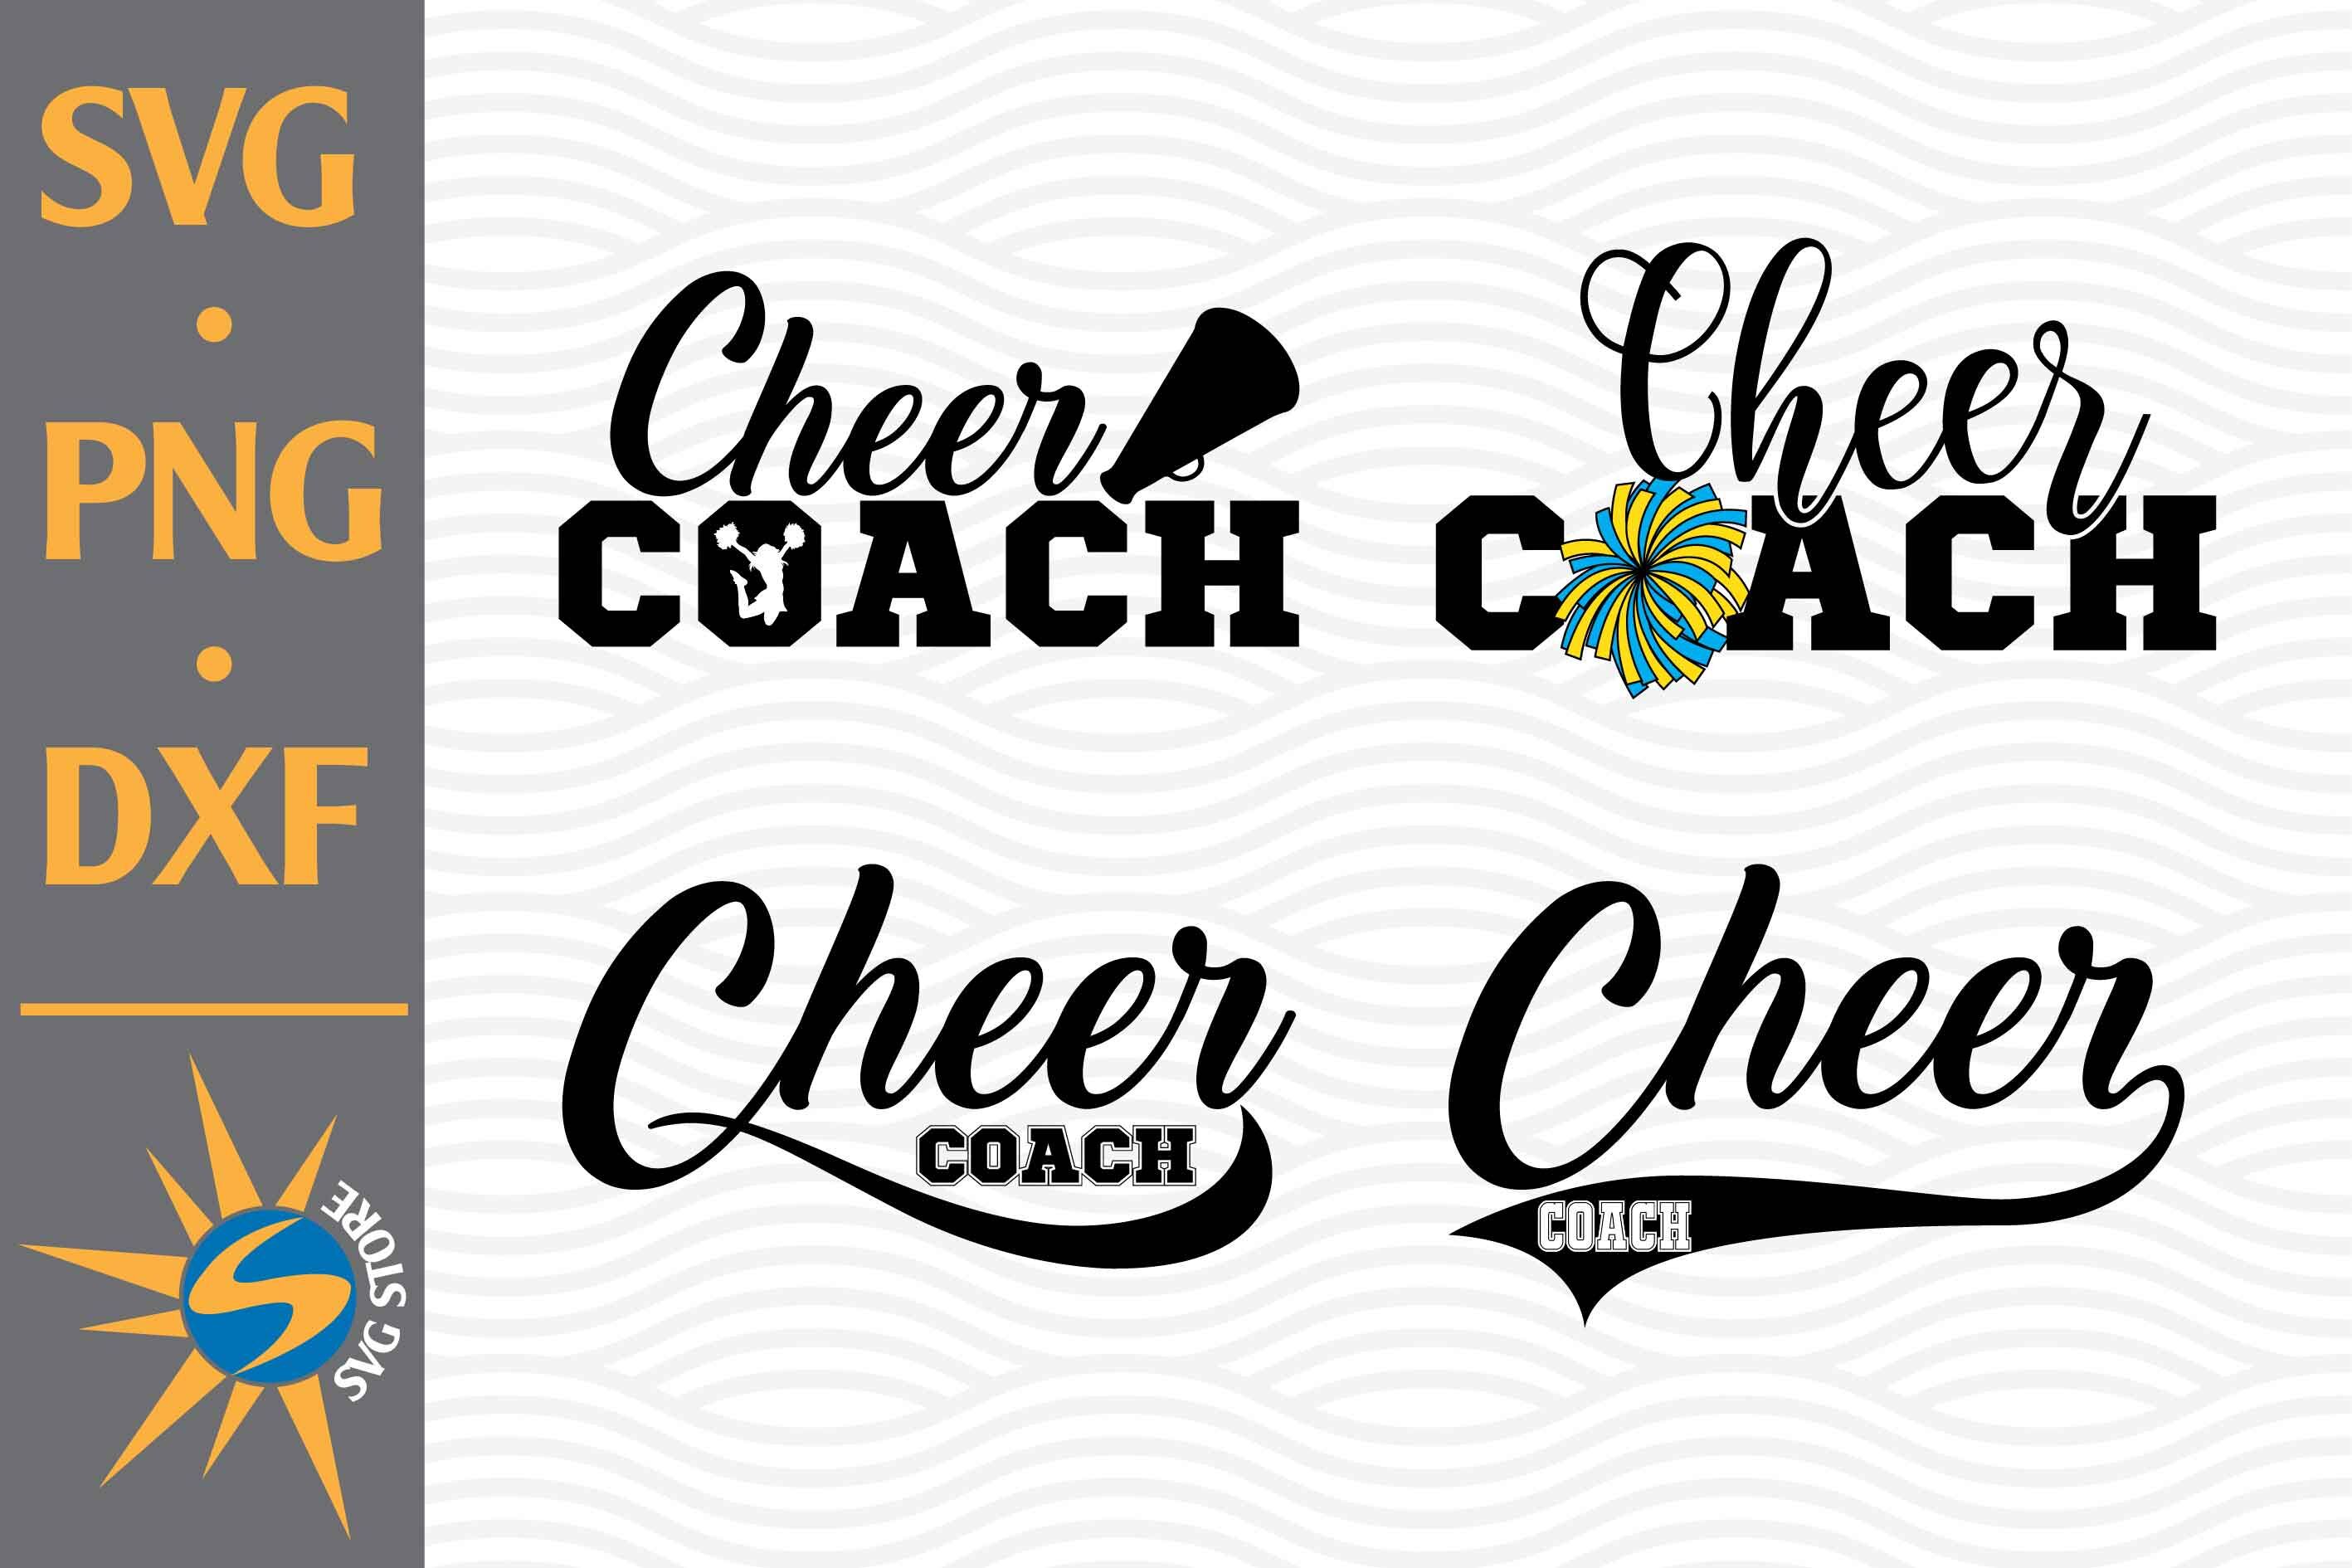 Cheer Coach SVG, PNG, DXF Digital Files Include By SVGStoreShop ...